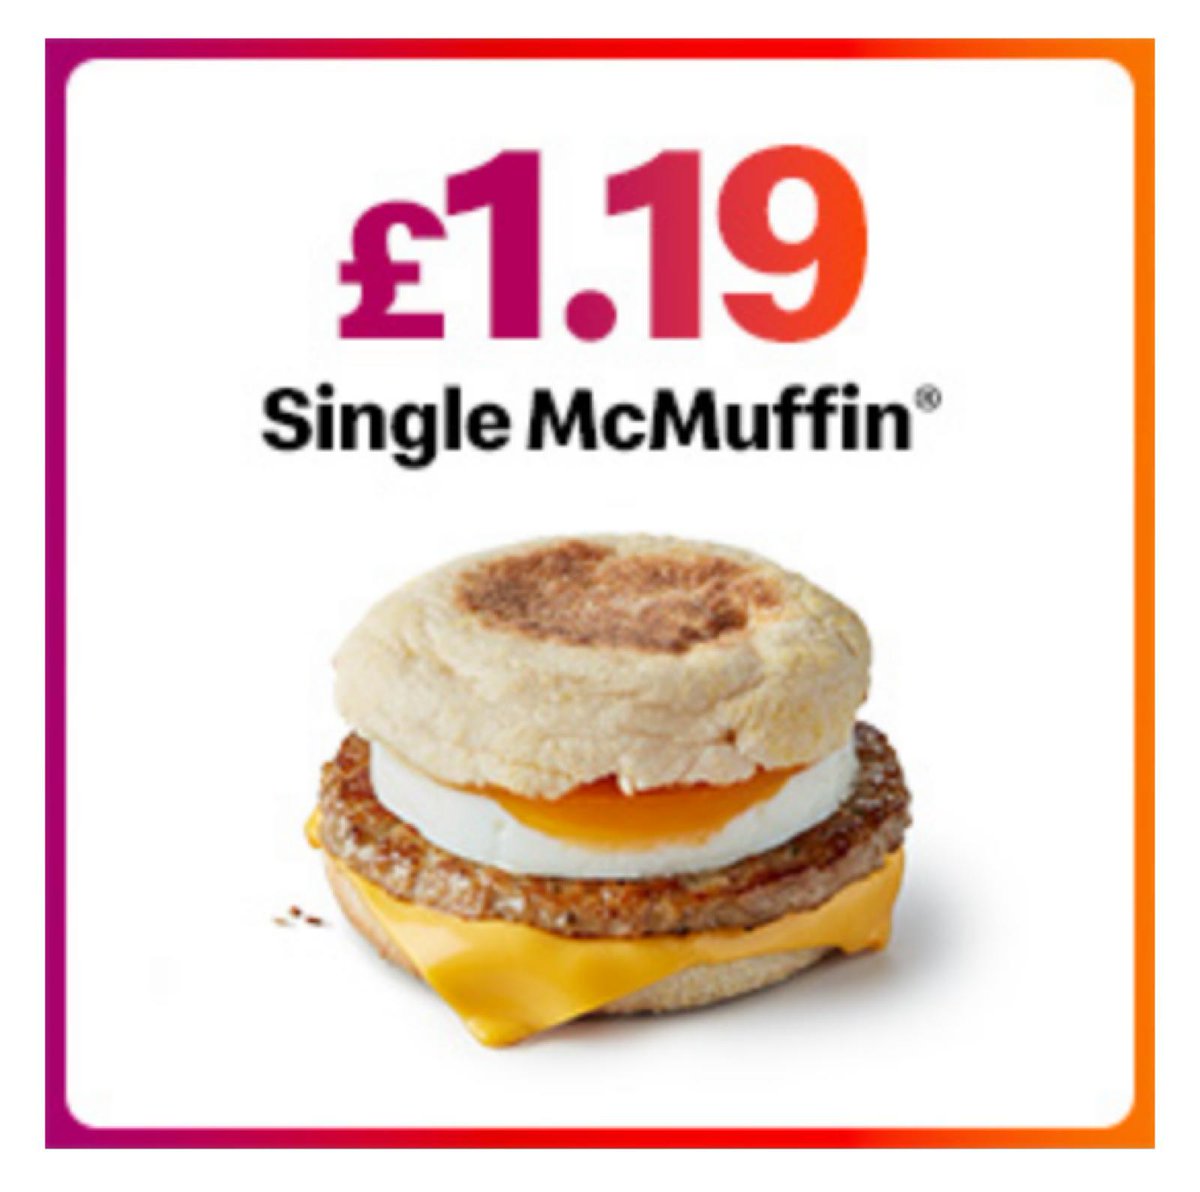 🌟 Kickstart your week with our delightful offer: Grab a Single McMuffin for just £1.19! 🍔✨ A perfect breakfast bite to fuel your day. Available on the app!